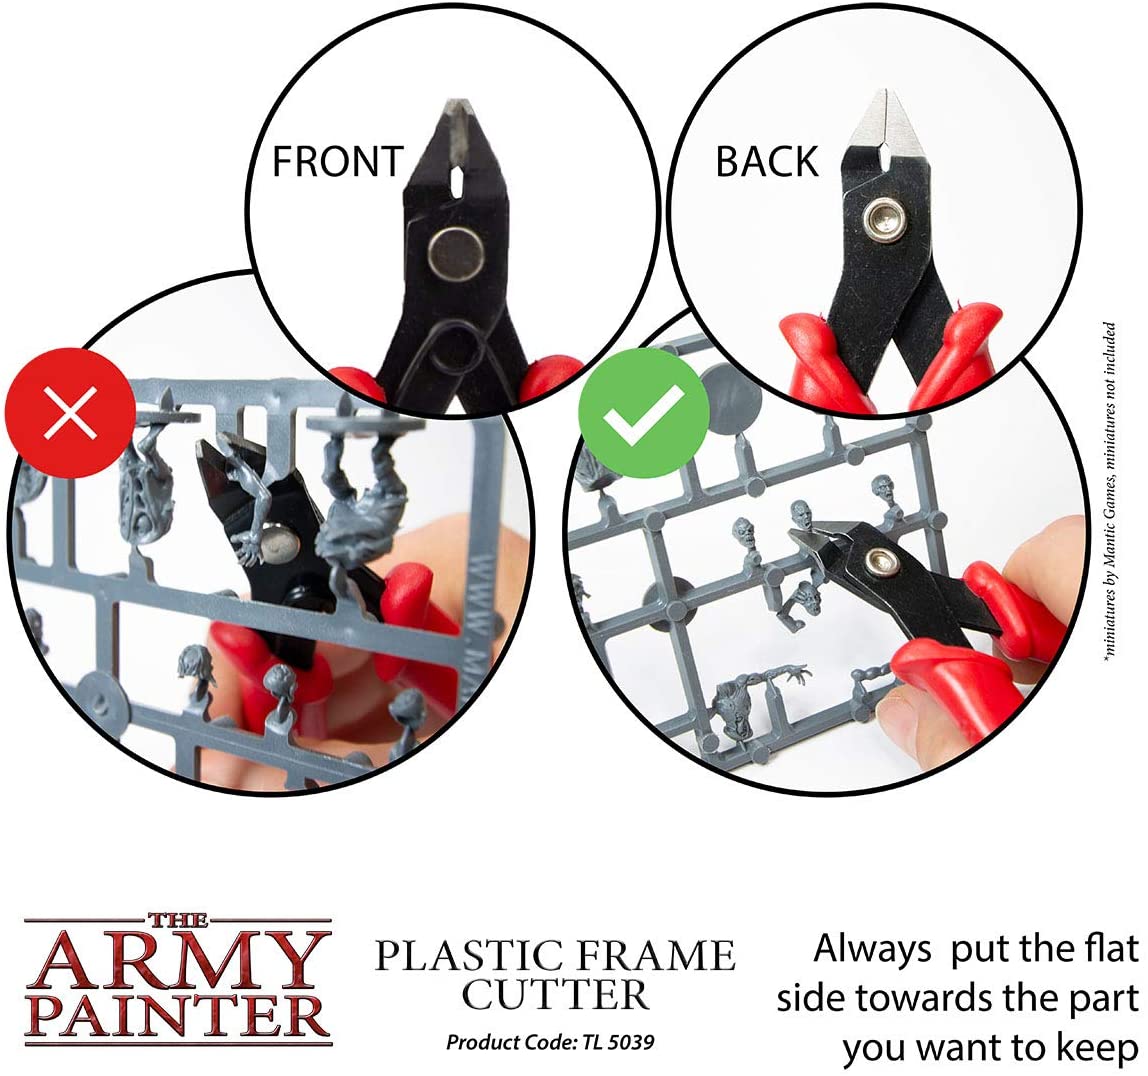 The Army Painter - Plastic Frame Cutter